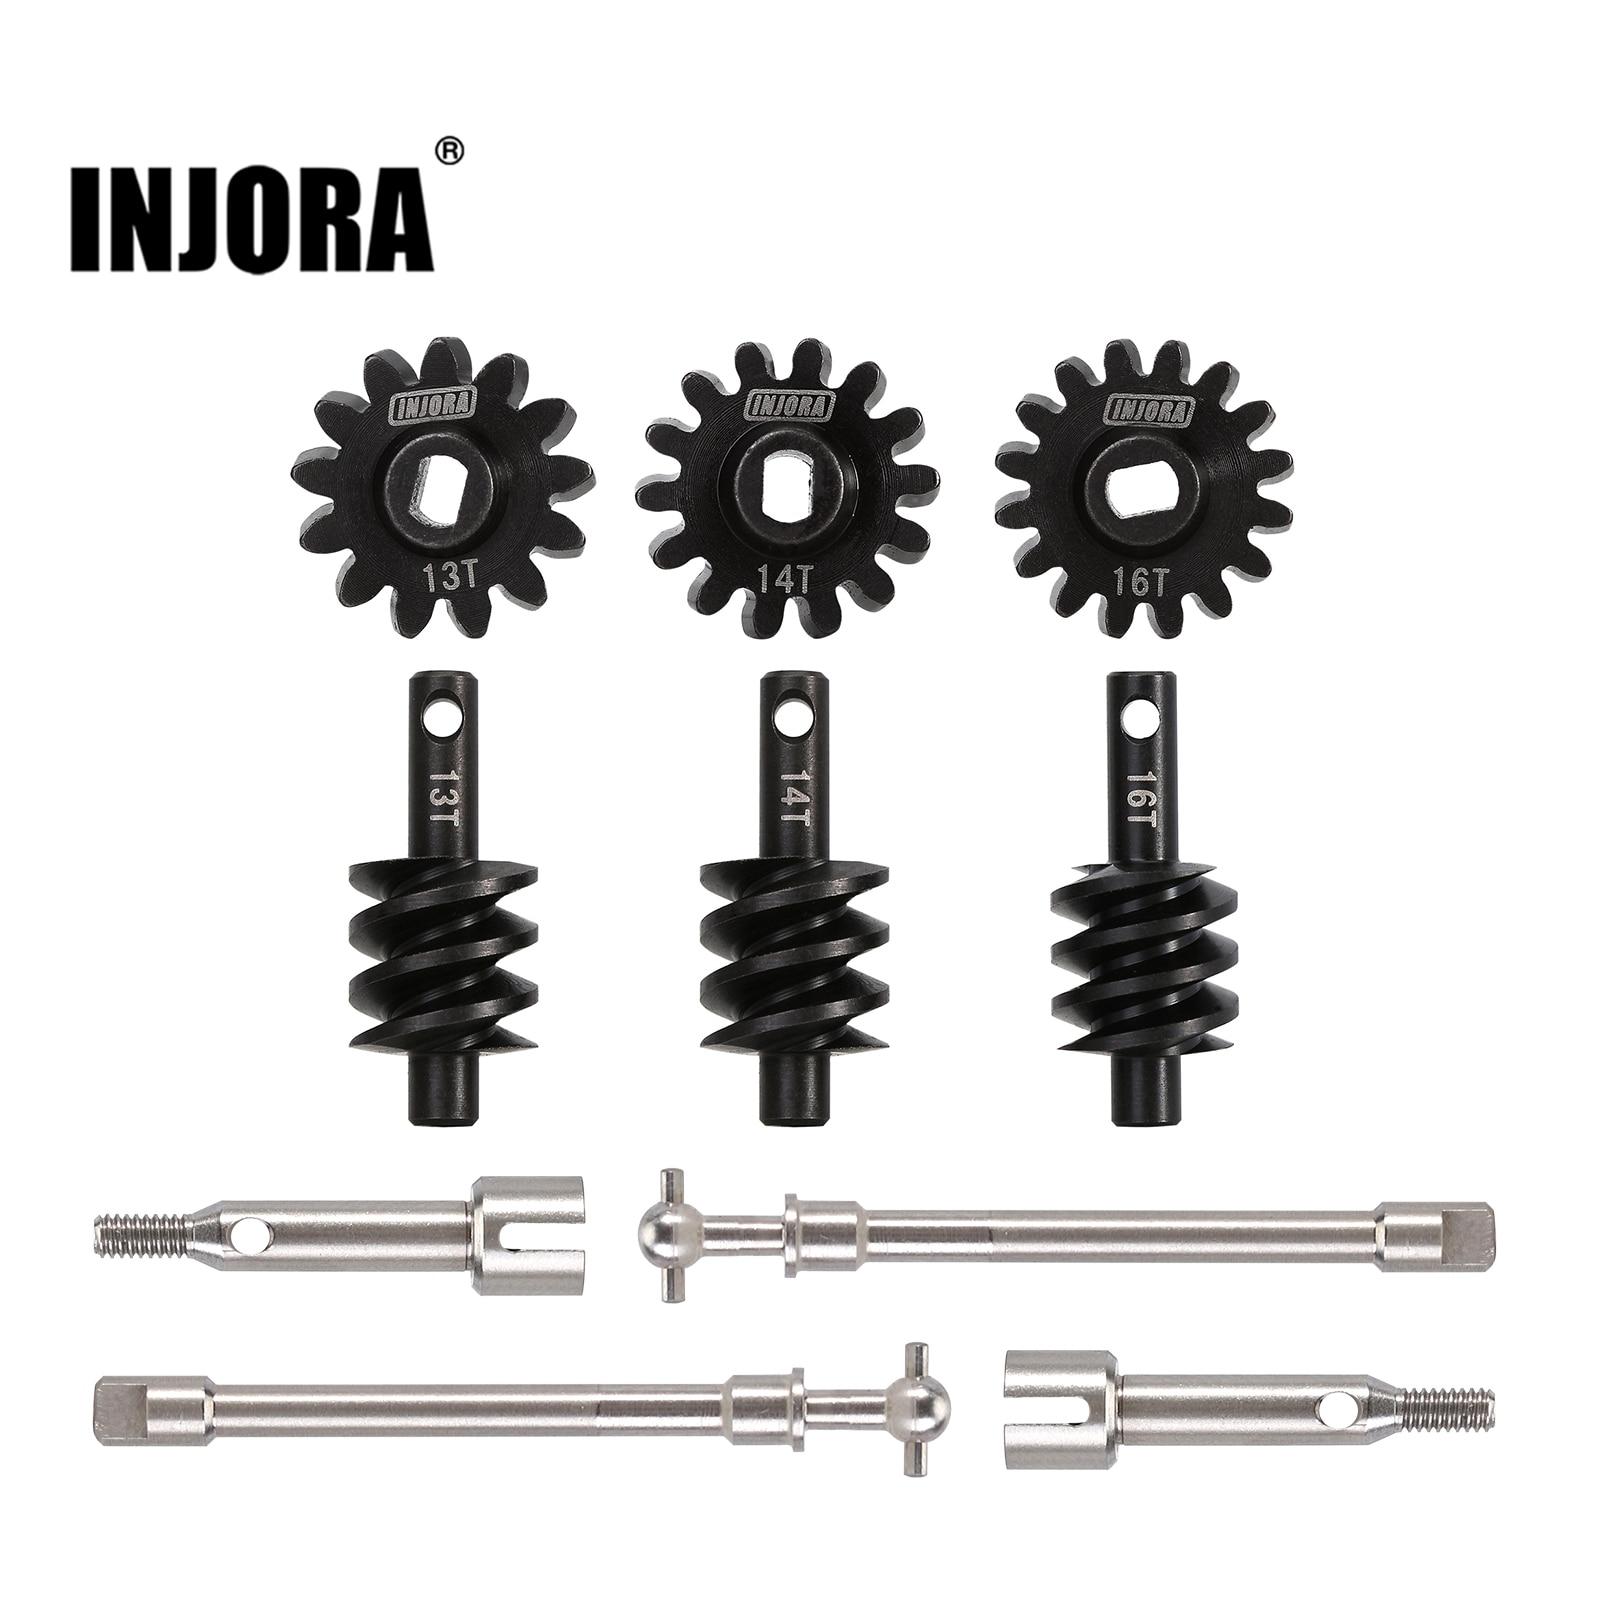 INJORA-Steel-4mm-Extended-Dogbone-Axle-Shaft-Worm-Differential-Gears-13T-14T-16T-for-INJORA-SCX24.jpg